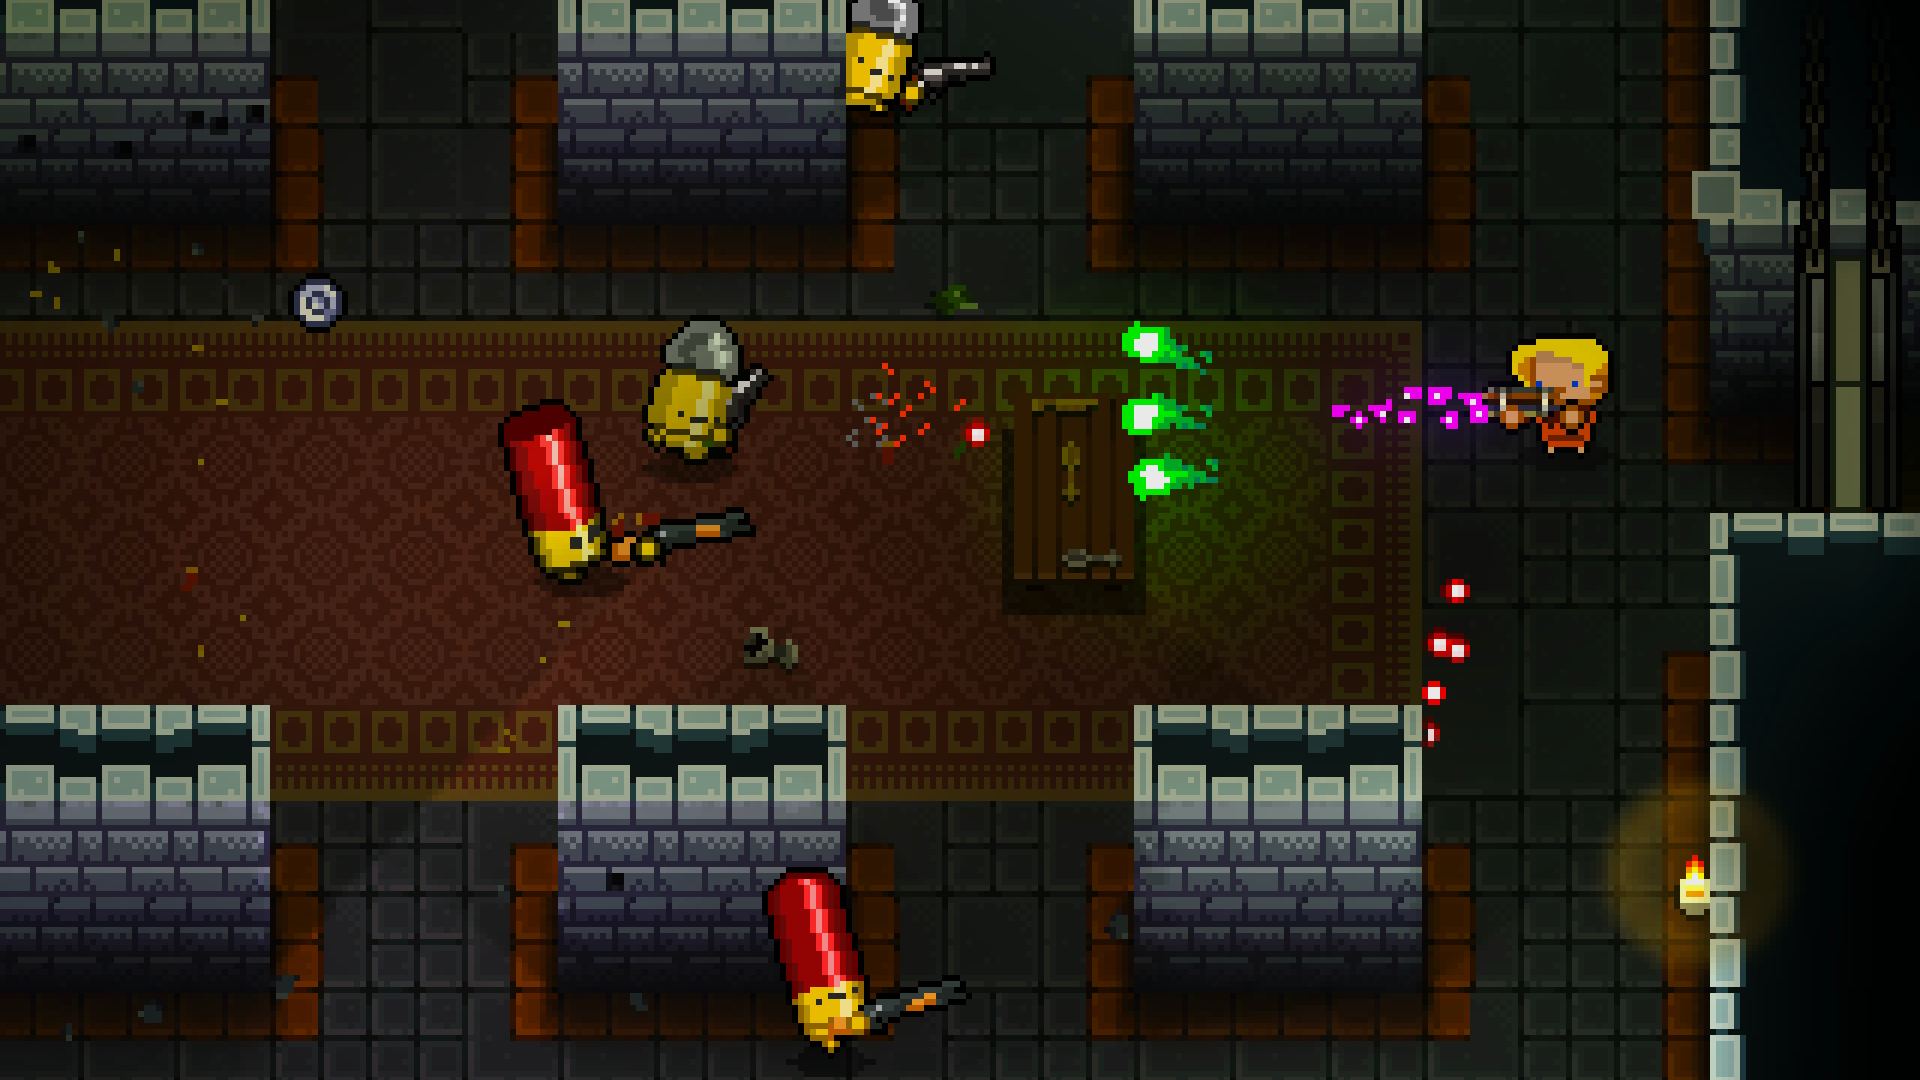 PAX East 2015: Enter The Gungeon Hands-On Preview